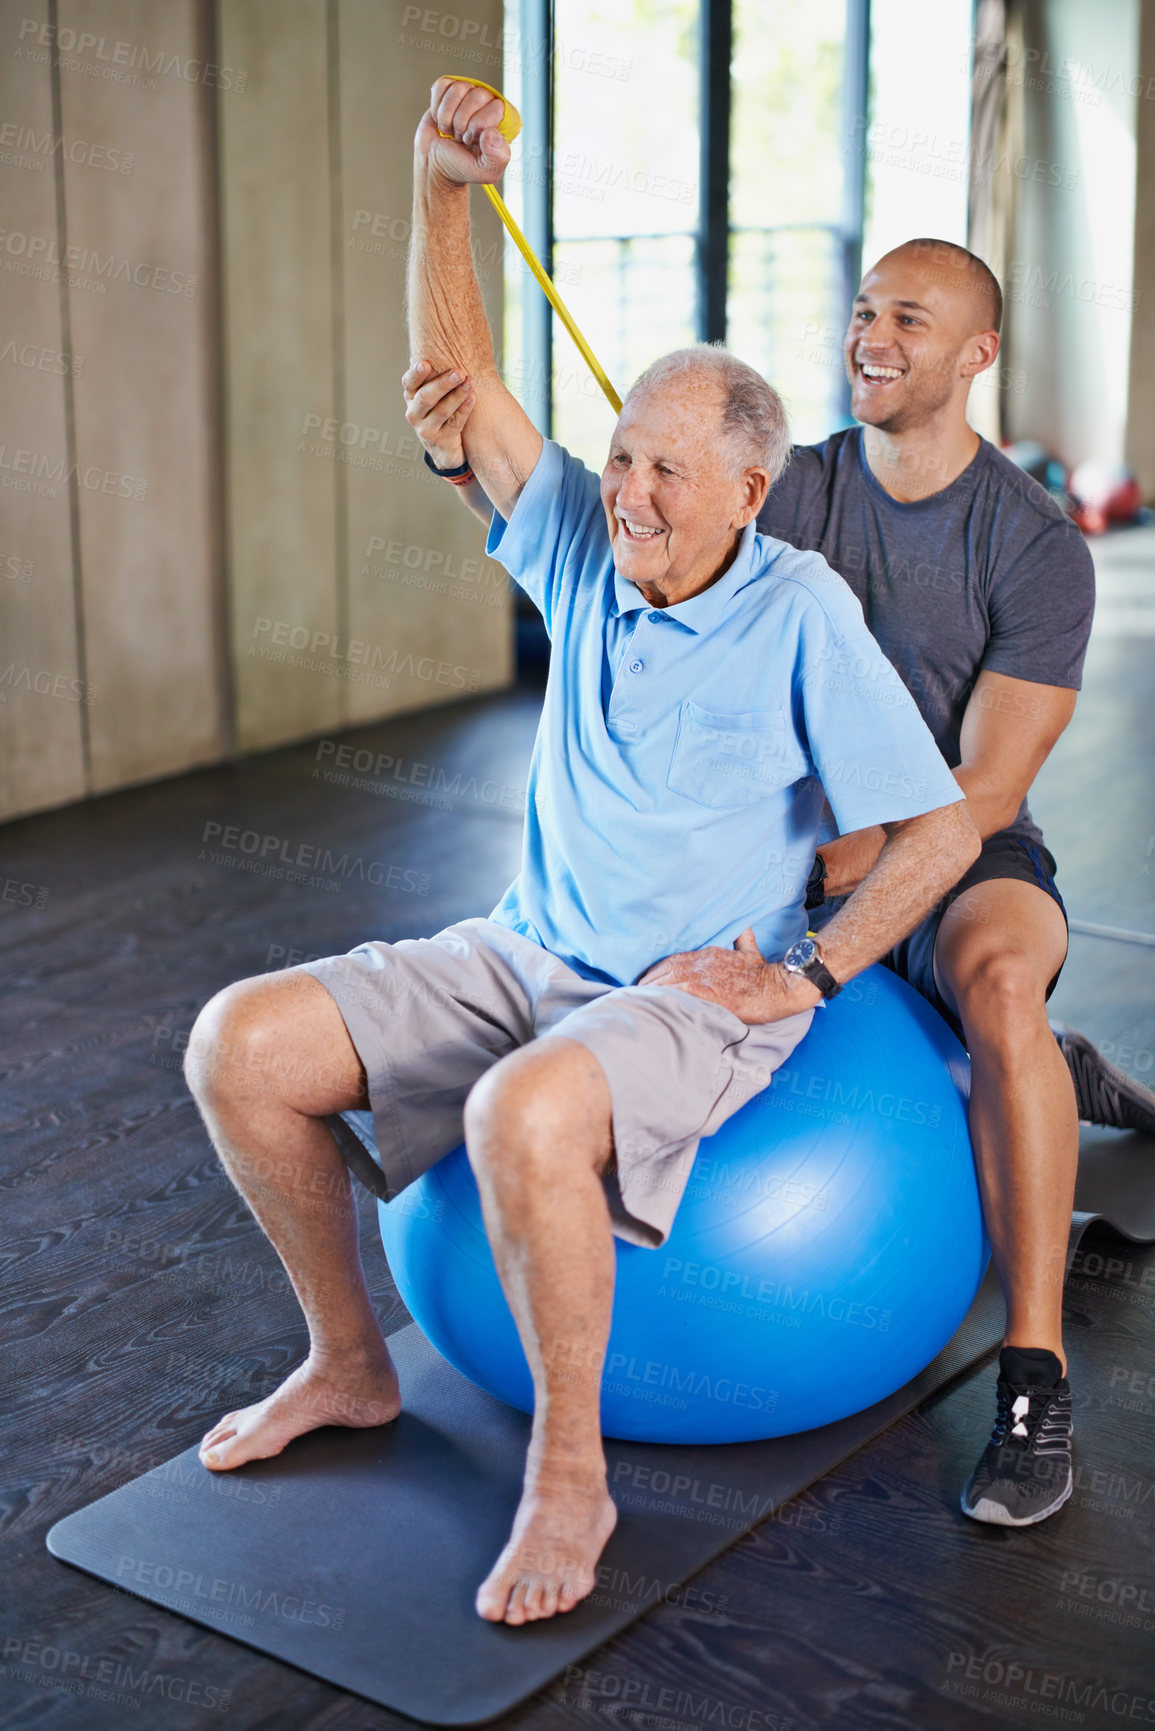 Buy stock photo A trainer helping an elderly man with fitness